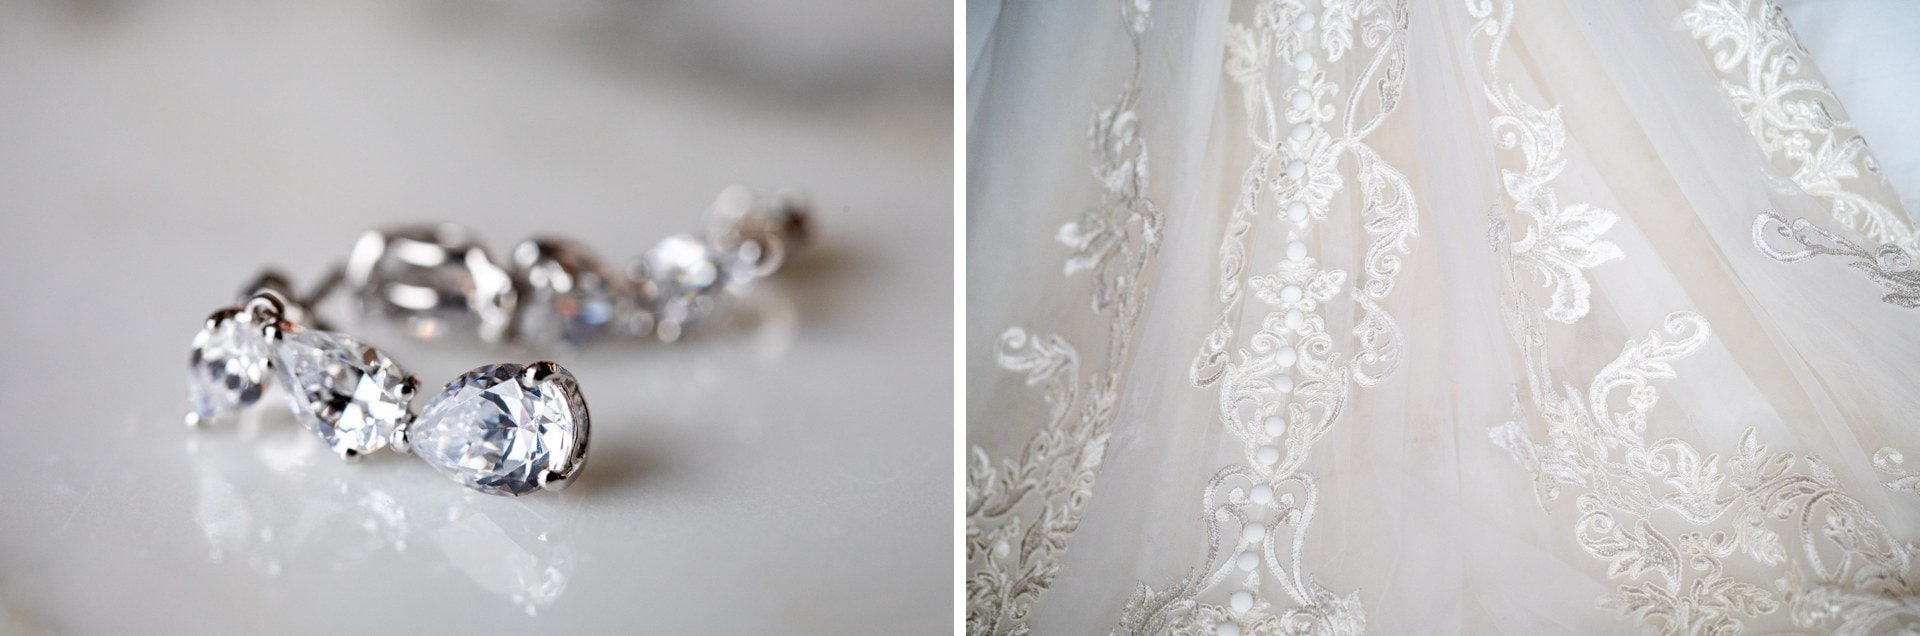 dress and jewellery detail